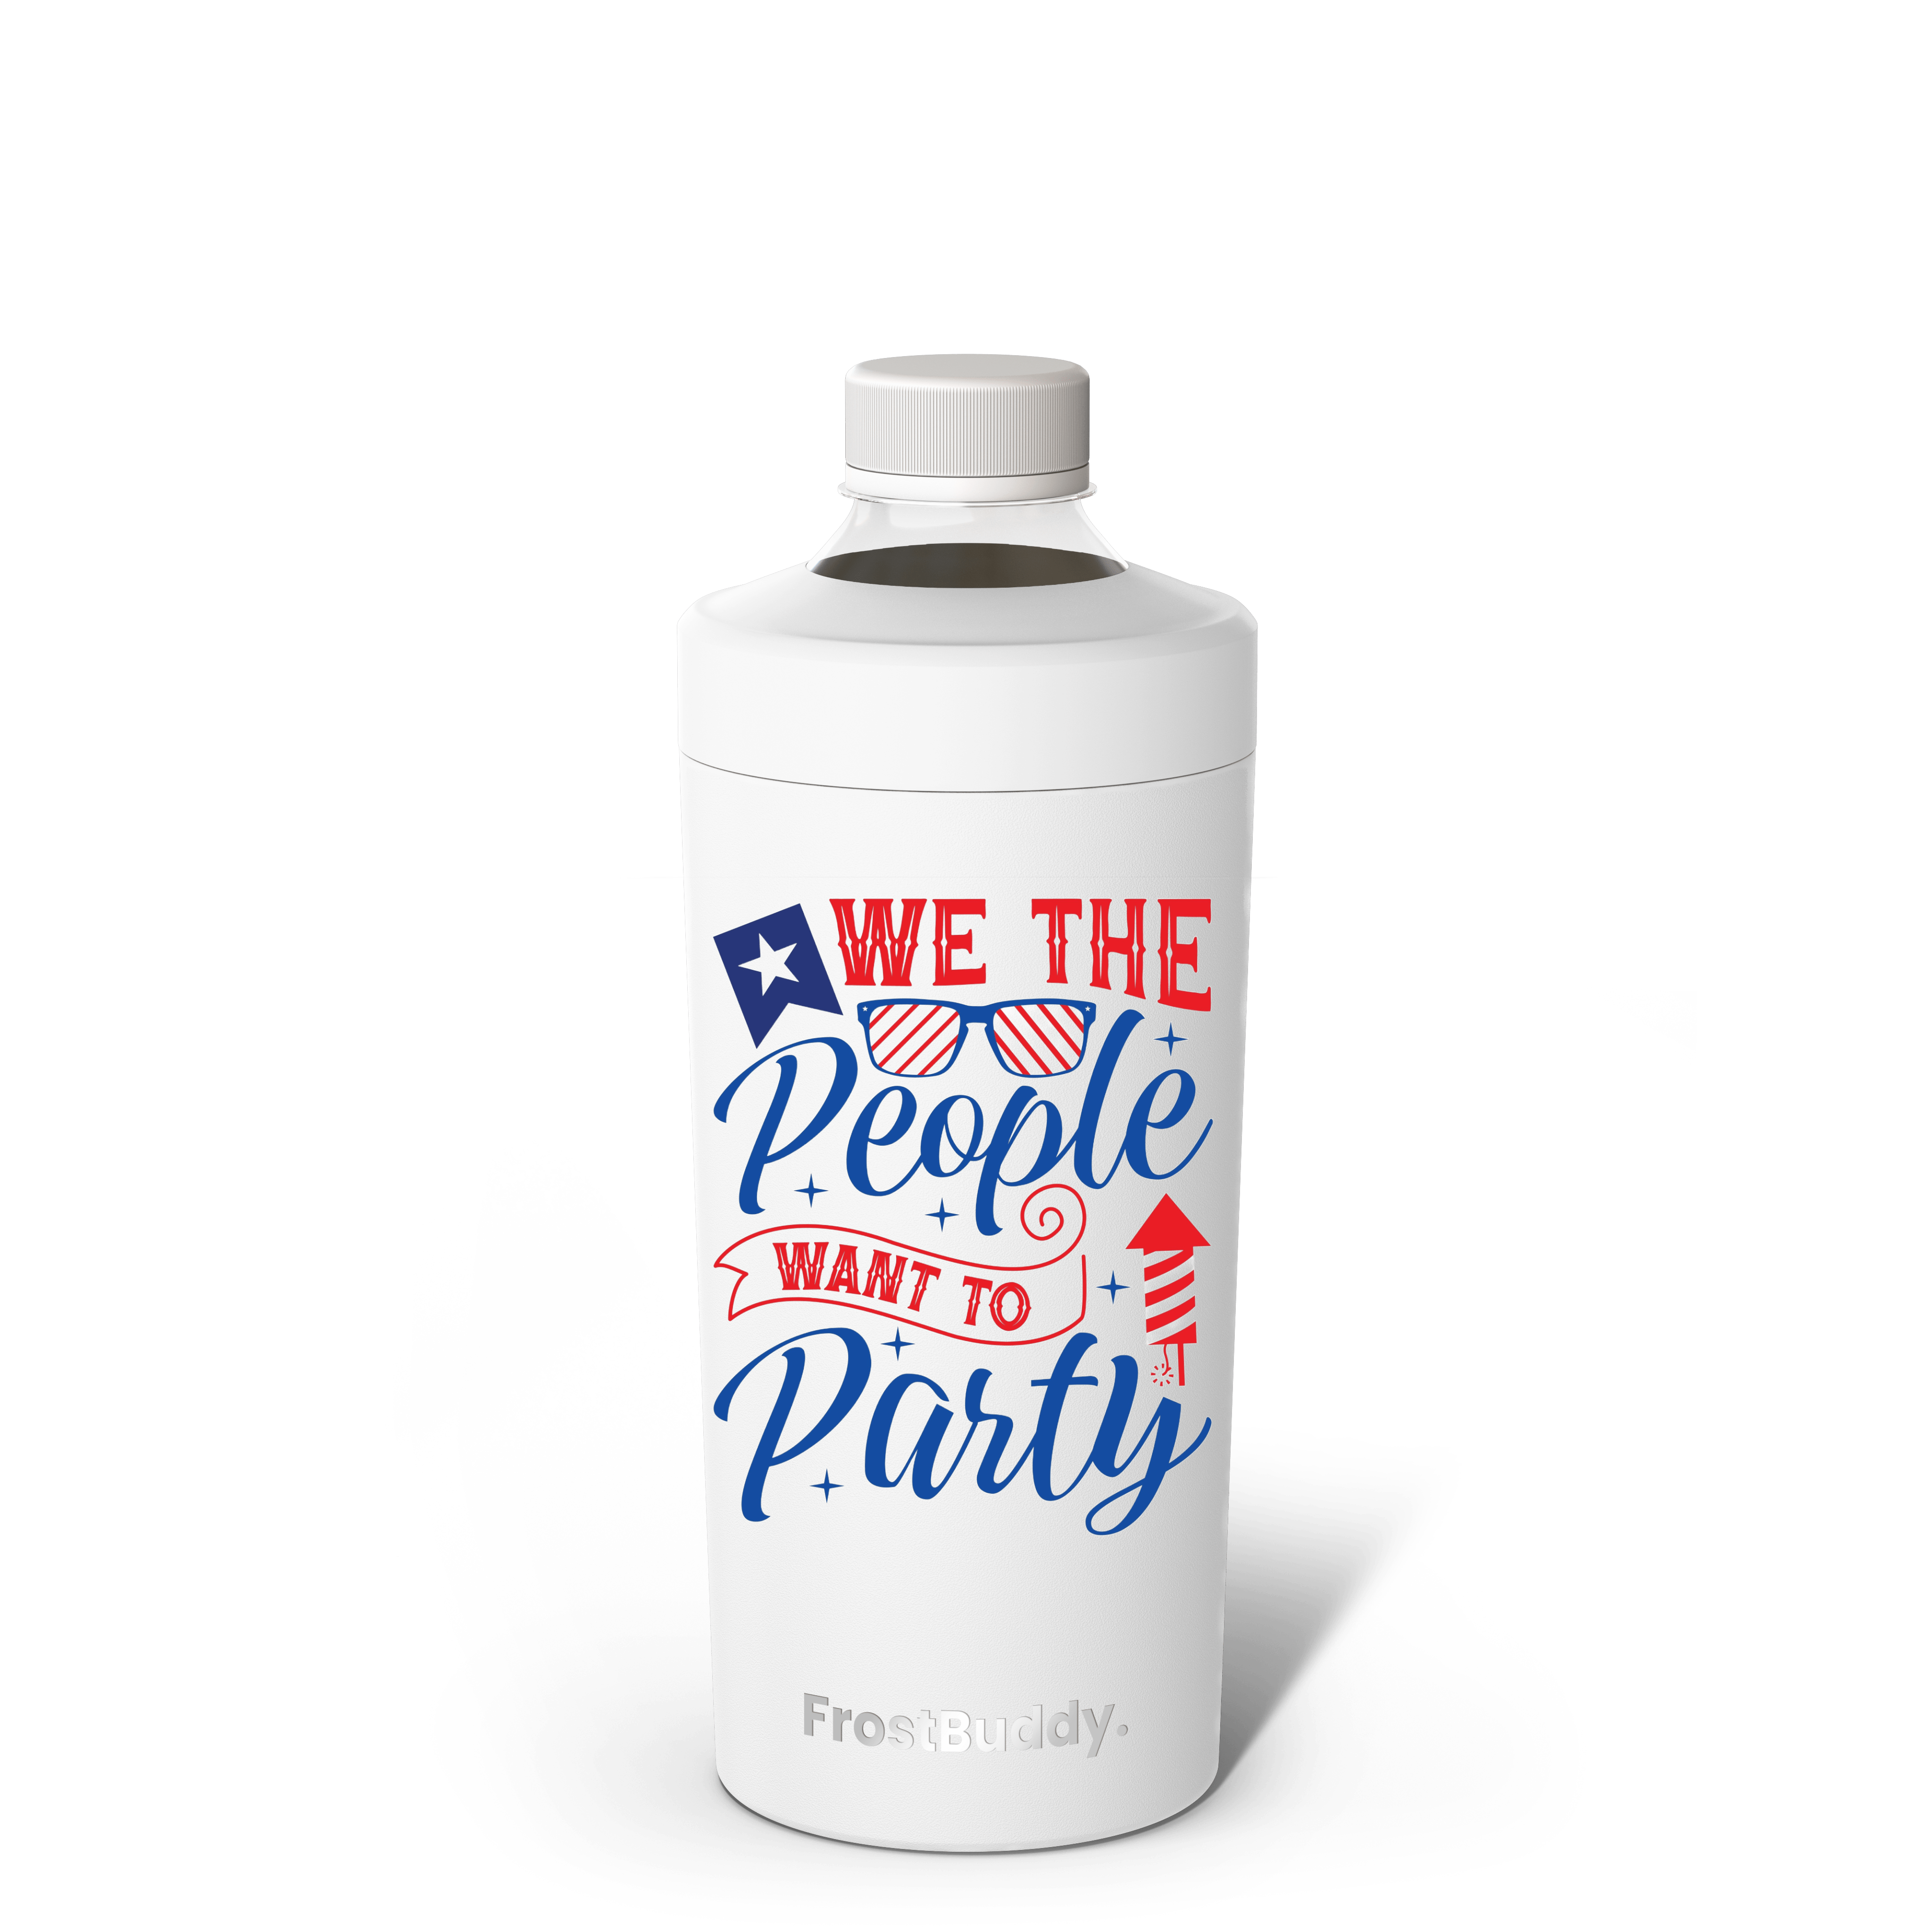 George Gu Universal Buddy XL Universal Buddy XL | We The People Want to Party